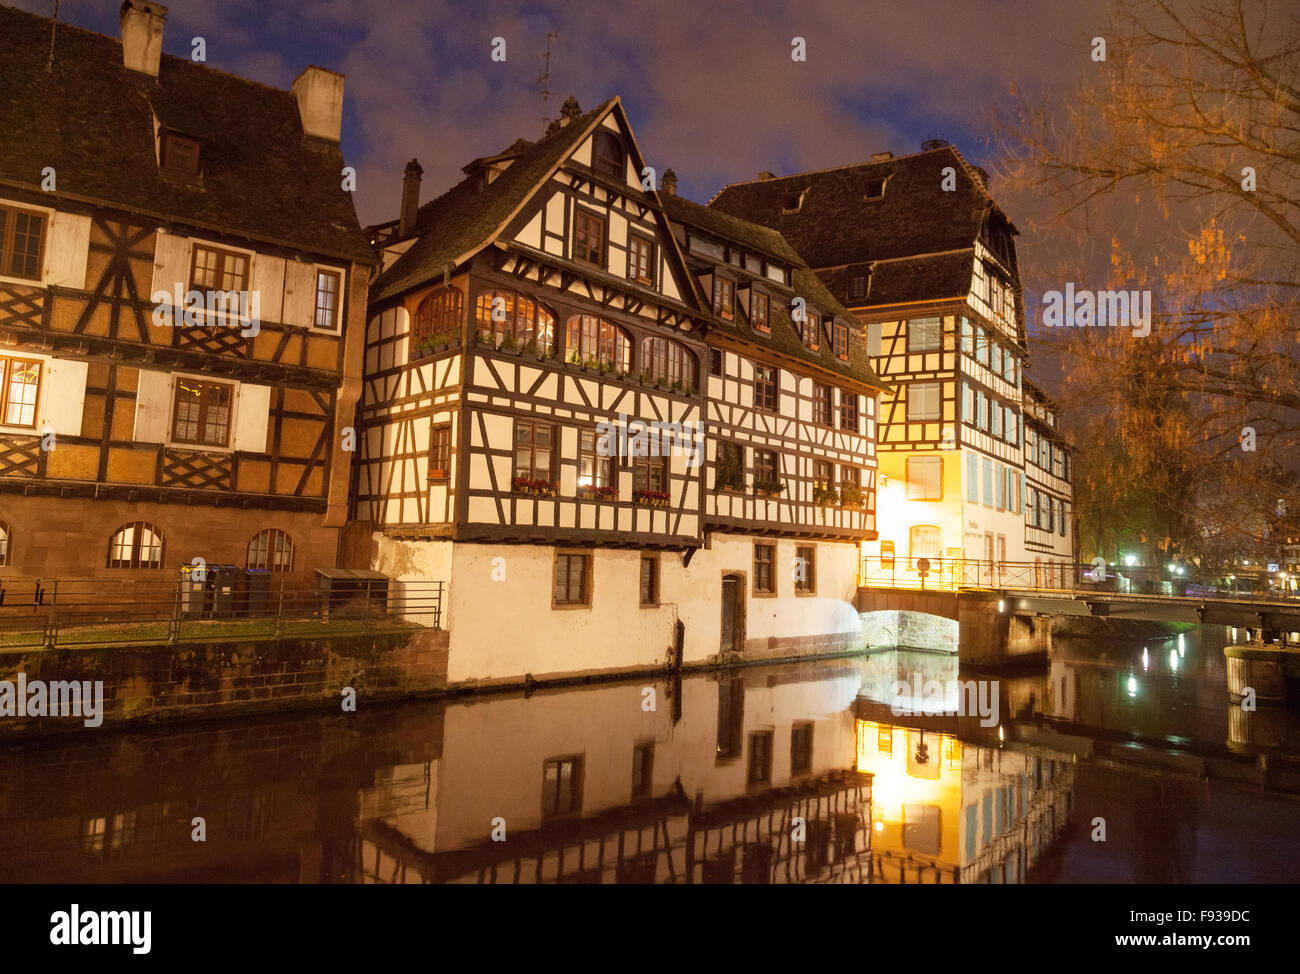 Medieval buildings and the River Ill at dusk, Petite France, Strasbourg old Town, Alsace France Europe Stock Photo